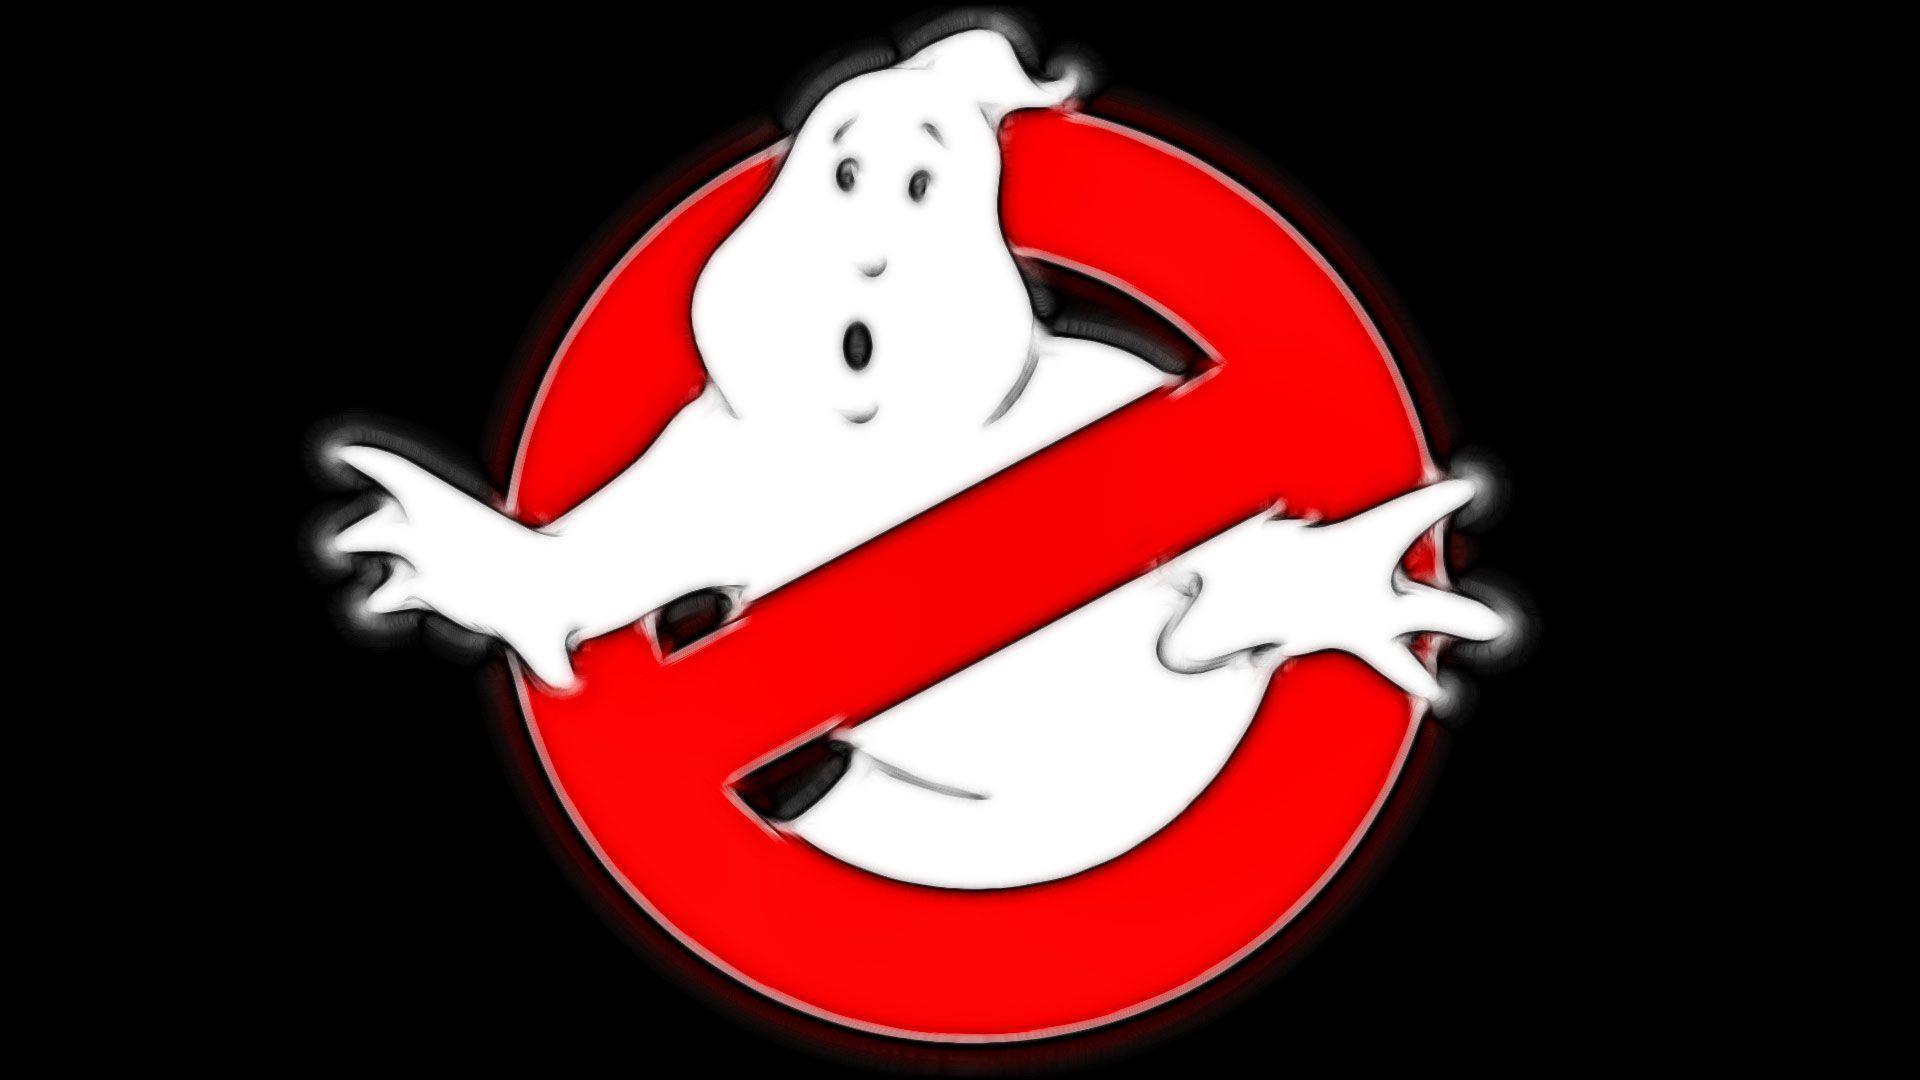 Ghostbusters Theme Song. Movie Theme Songs & TV Soundtracks